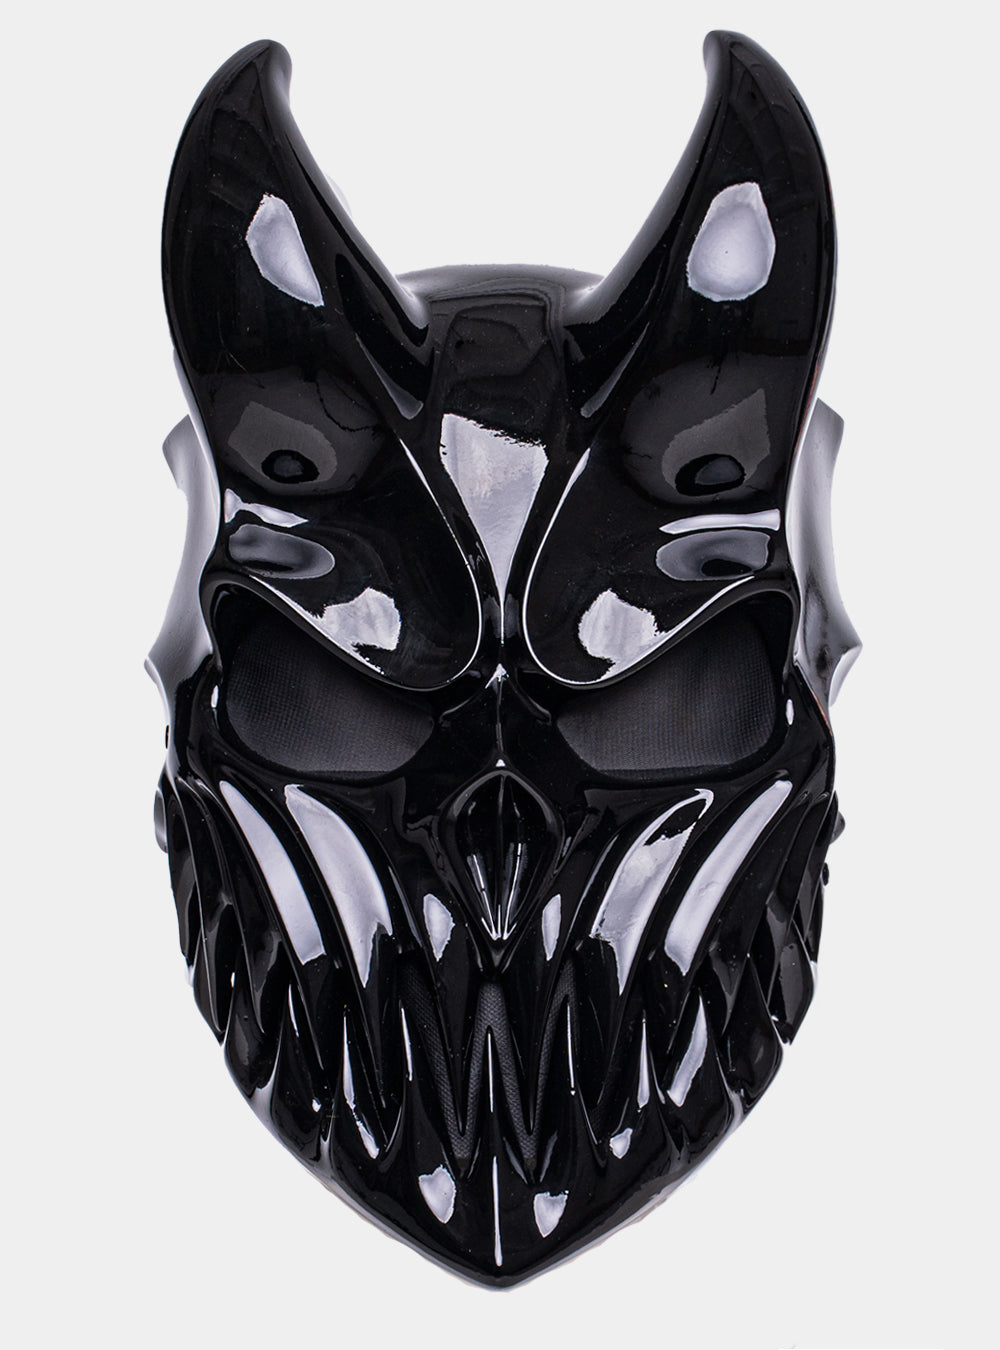 BLACK MASK “KID OF DARKNESS” by ALEX (SLAUGHTER TO PREVAIL) - buy KOD mask Terrible store | KOD mask - kid of darkness mask – alexterrible